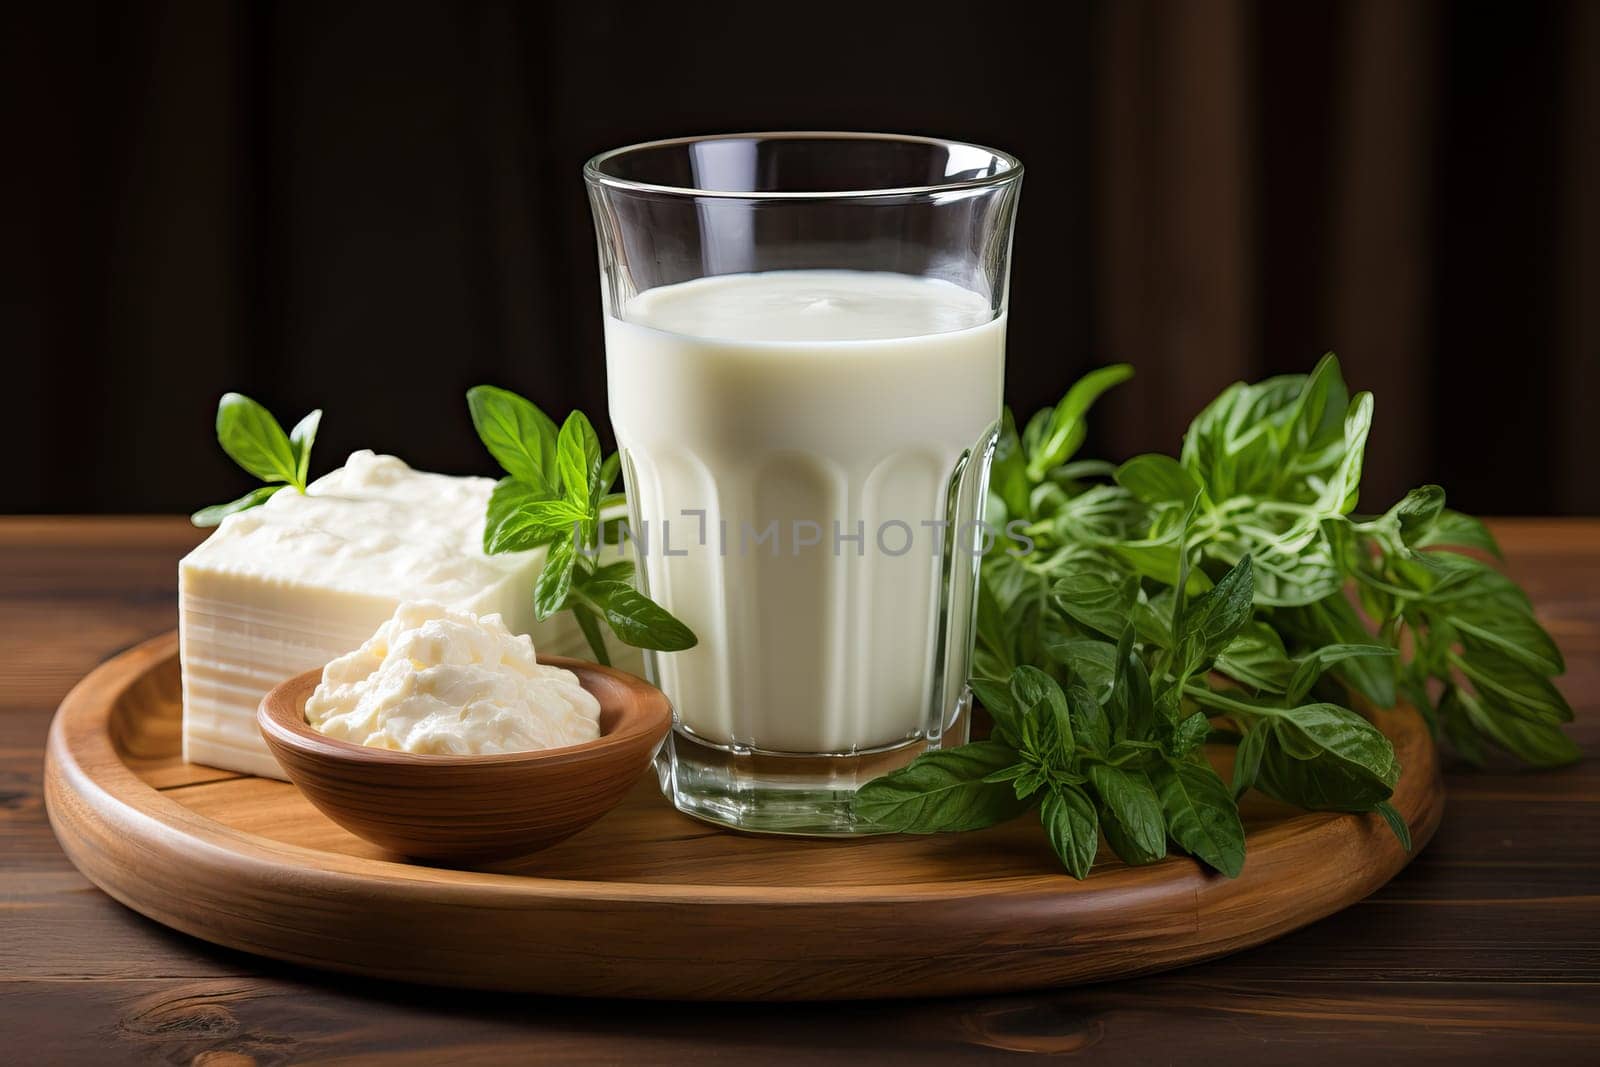 Fresh cow's cheese and milk on a wooden board on a black background.